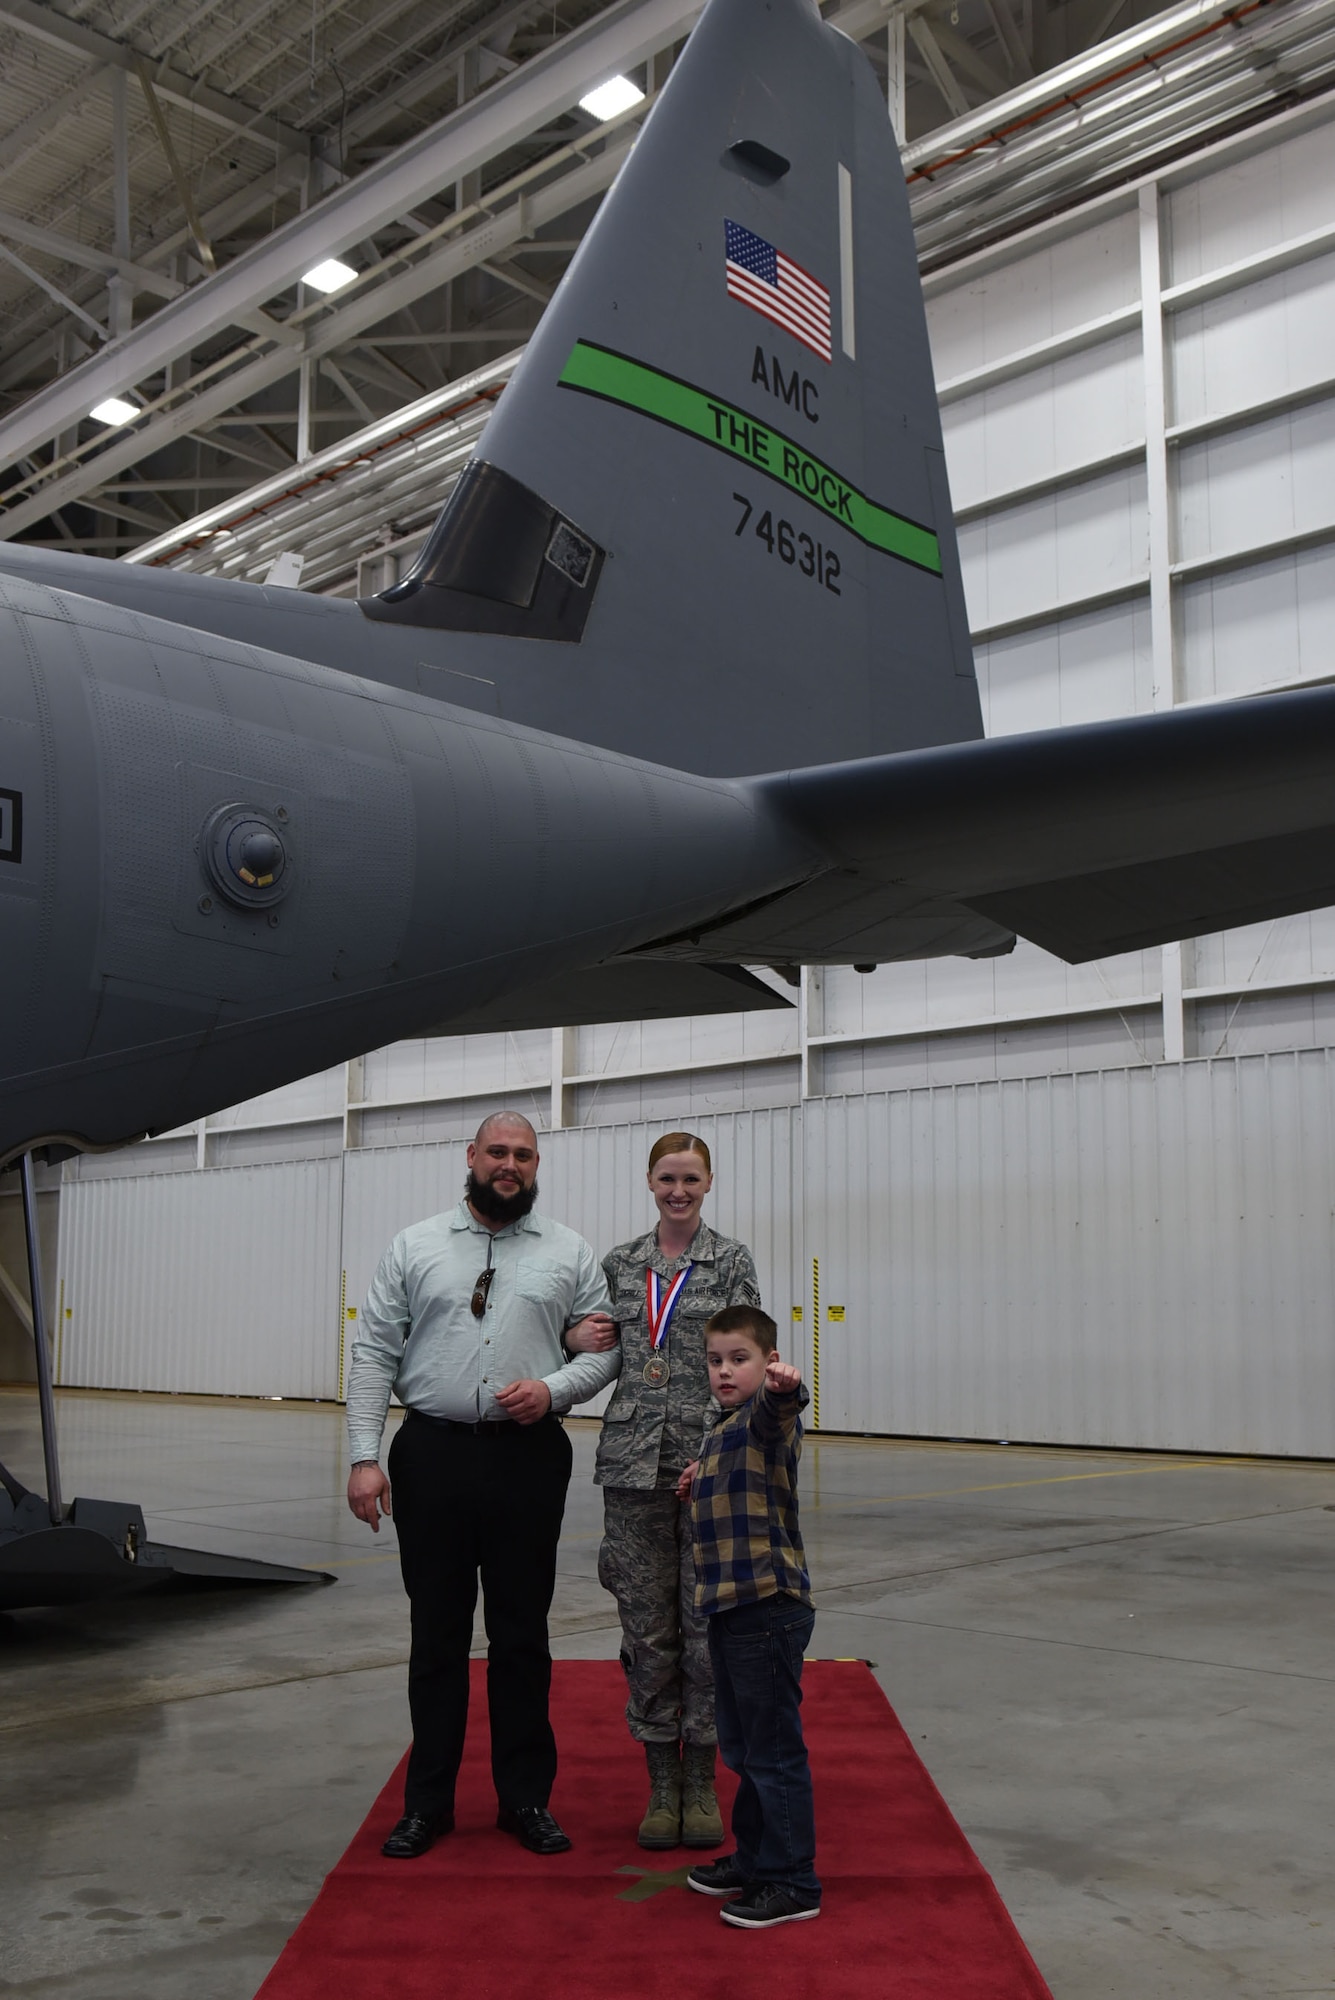 U.S. Air Force Senior Airman Katie Cogbill, 19th Medical Operations Squadron medical technician, poses for a photo with her husband, Daniel, and her son, Barrett, during the 2016 19th Airlift Wing Annual Awards ceremony Jan. 27, 2017, at Little Rock Air Force Base, Ark. Cogbill went up against four other Airmen from the 19th AW to win the award. (U.S. Air Force photo by Airman 1st Class Kevin Sommer Giron)